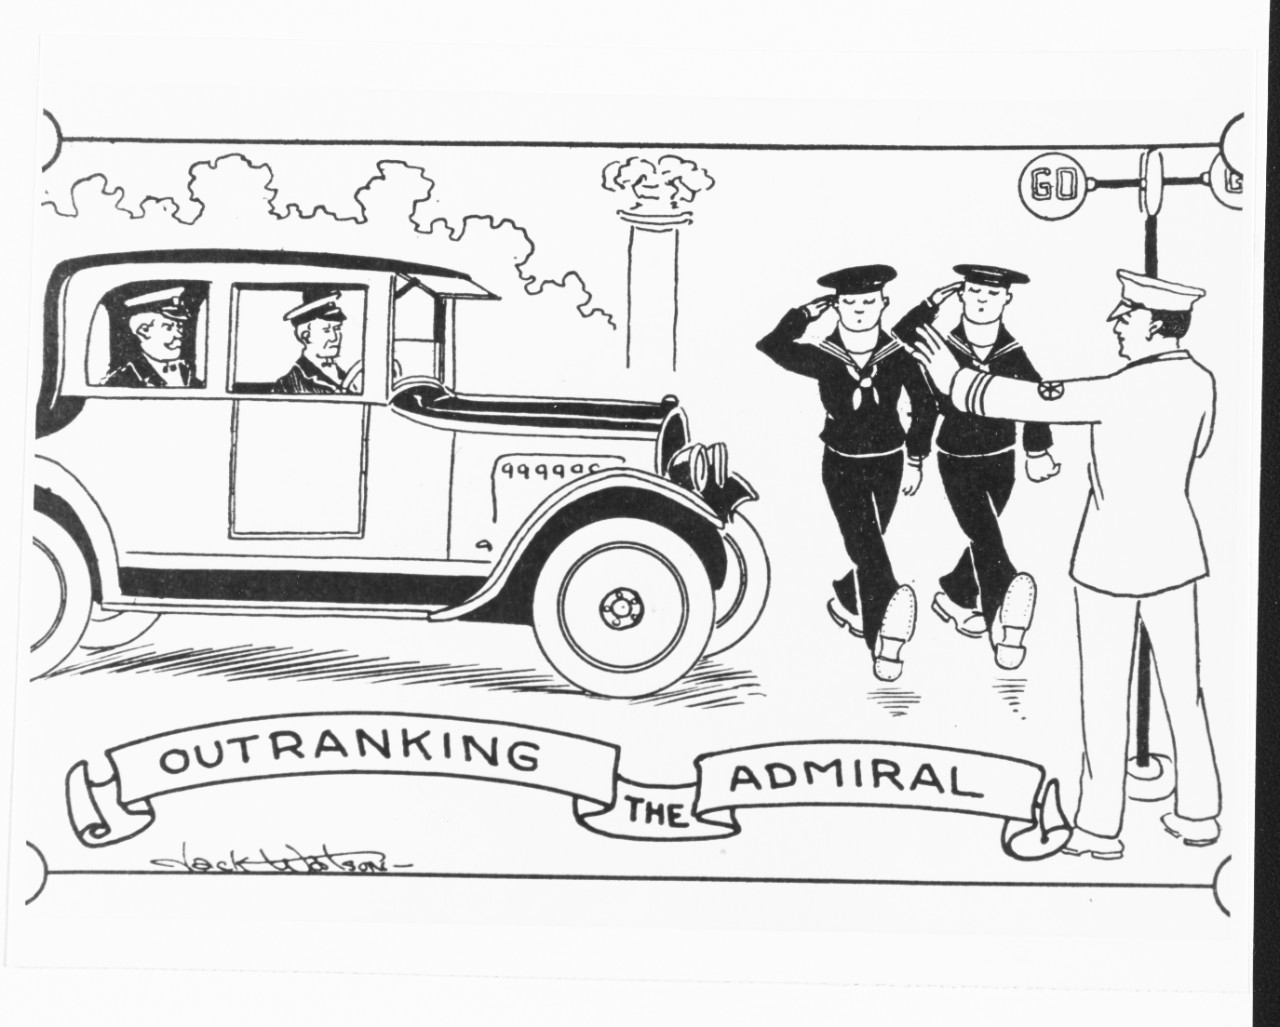 "Outranking the Admiral" postcard cartoon by Jack Watson.